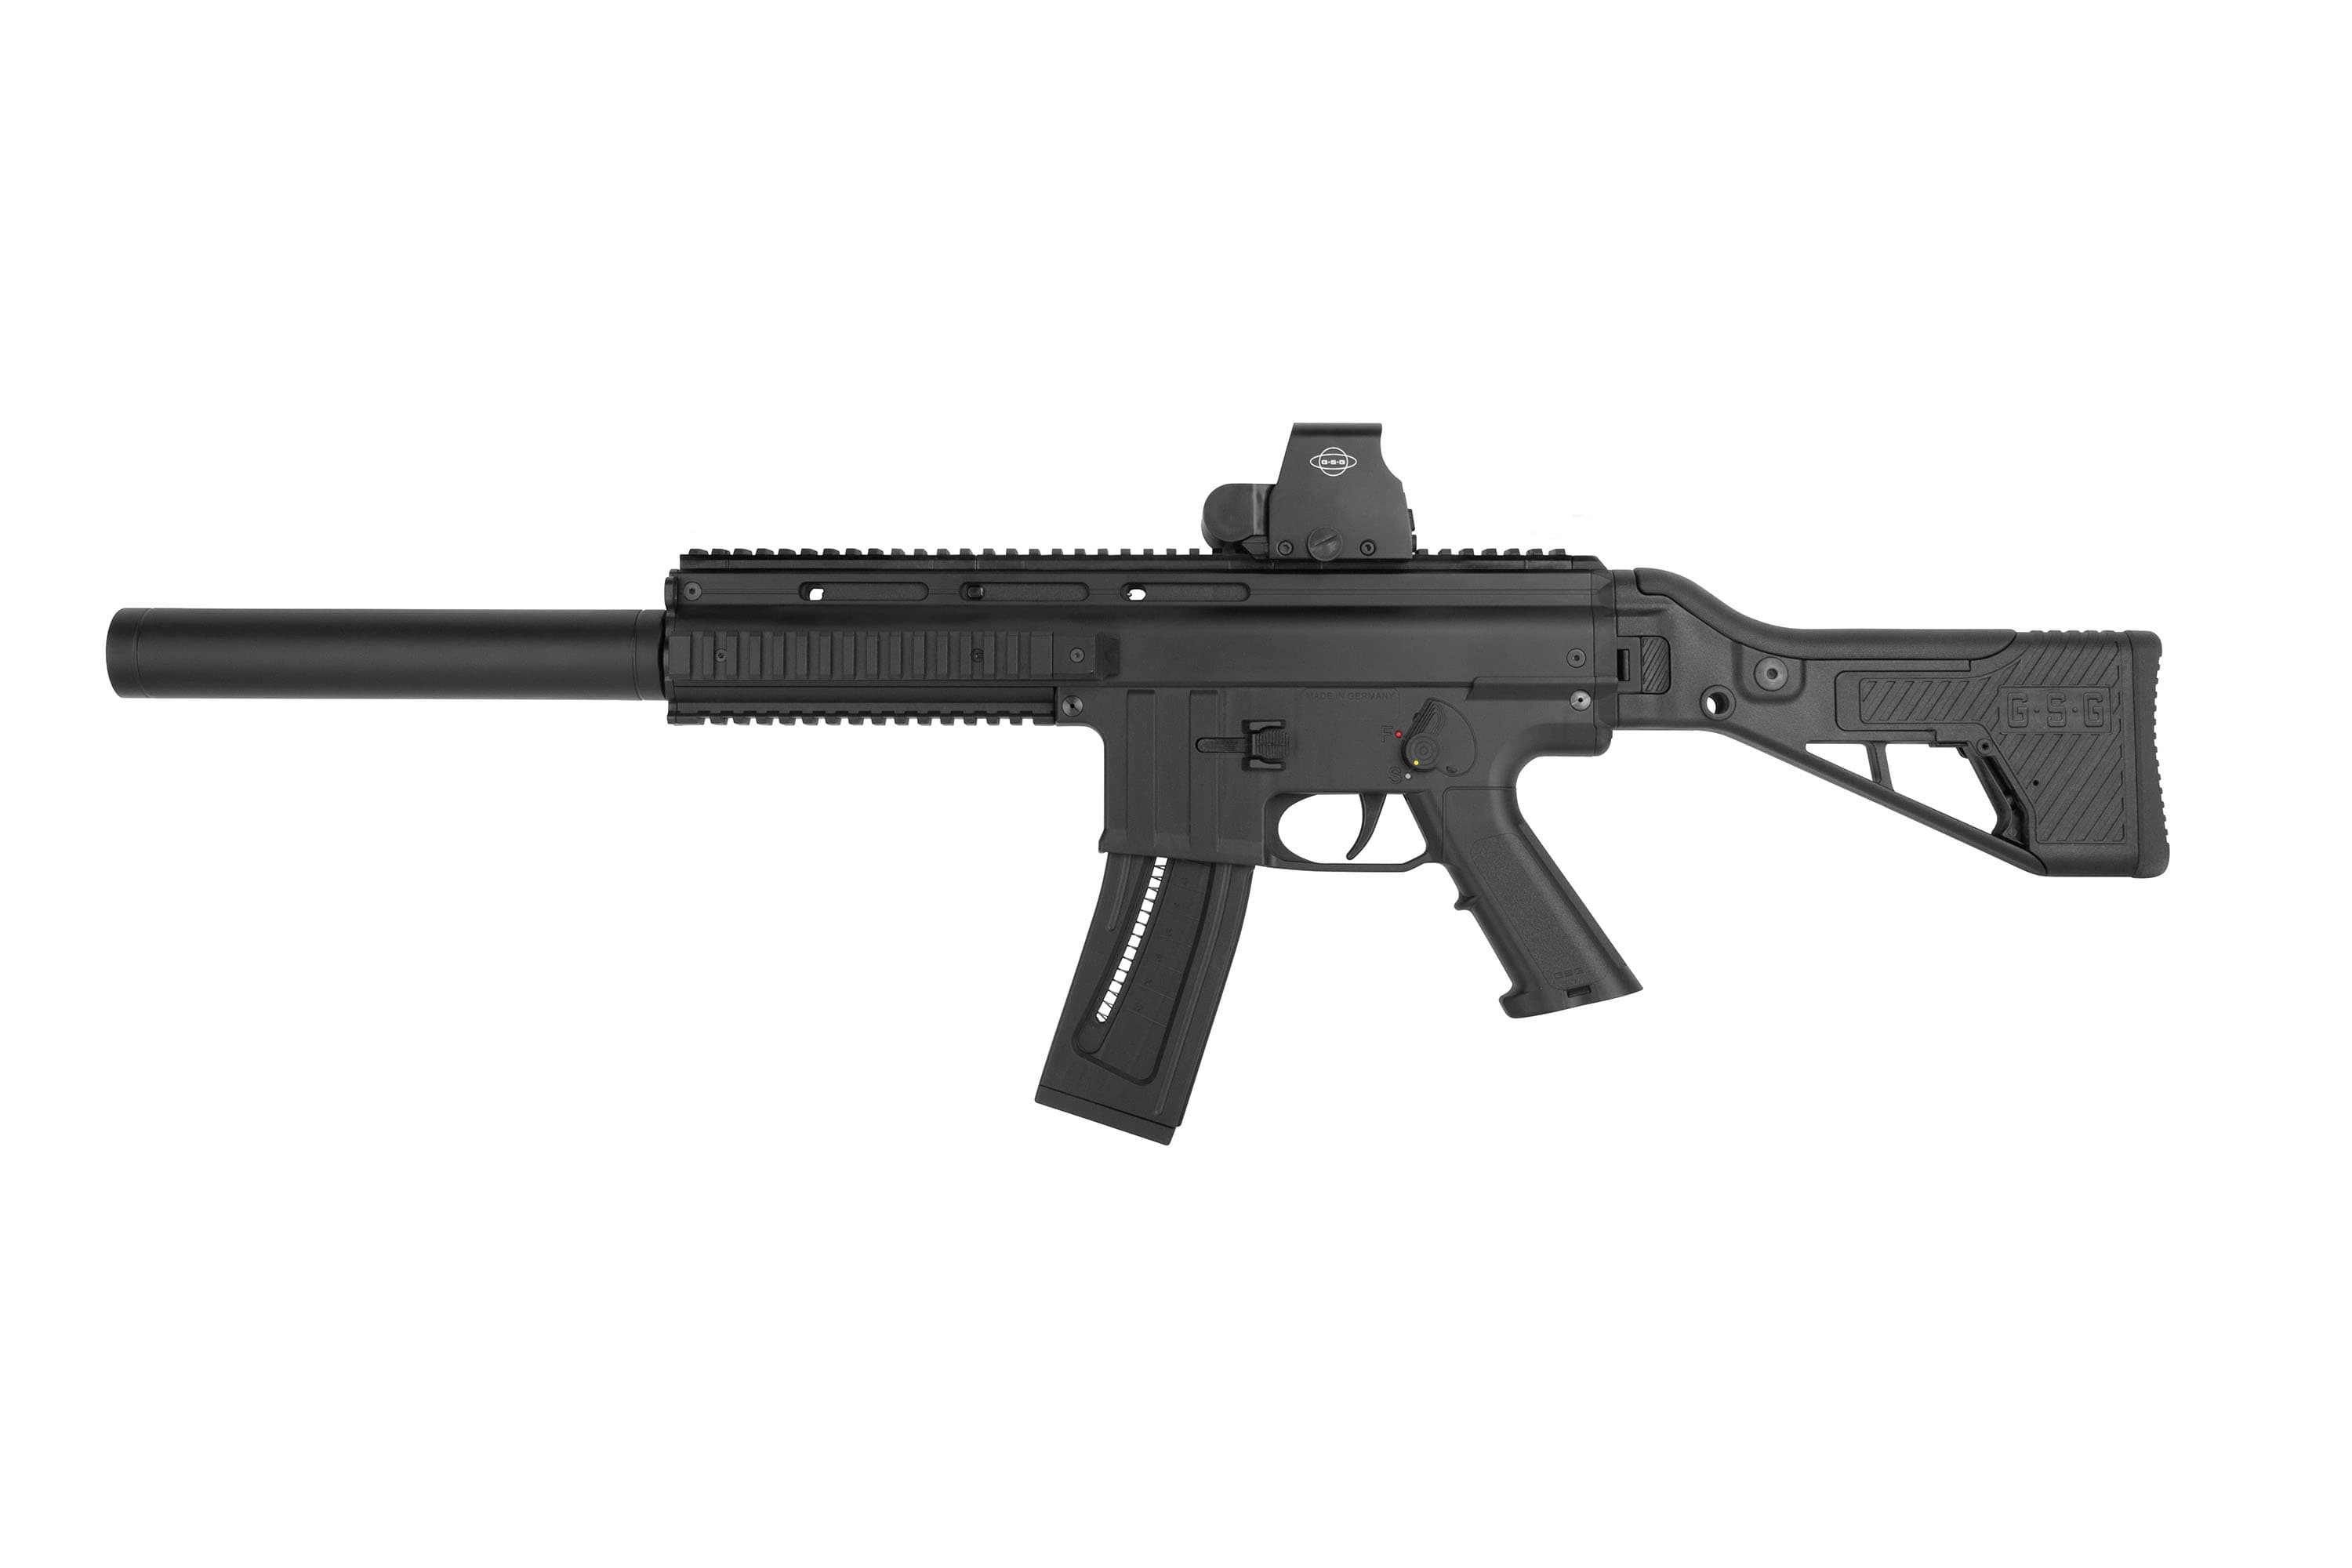 Special Edition GSG-15 Semi-Automatic Rifle with Red Dot Sight